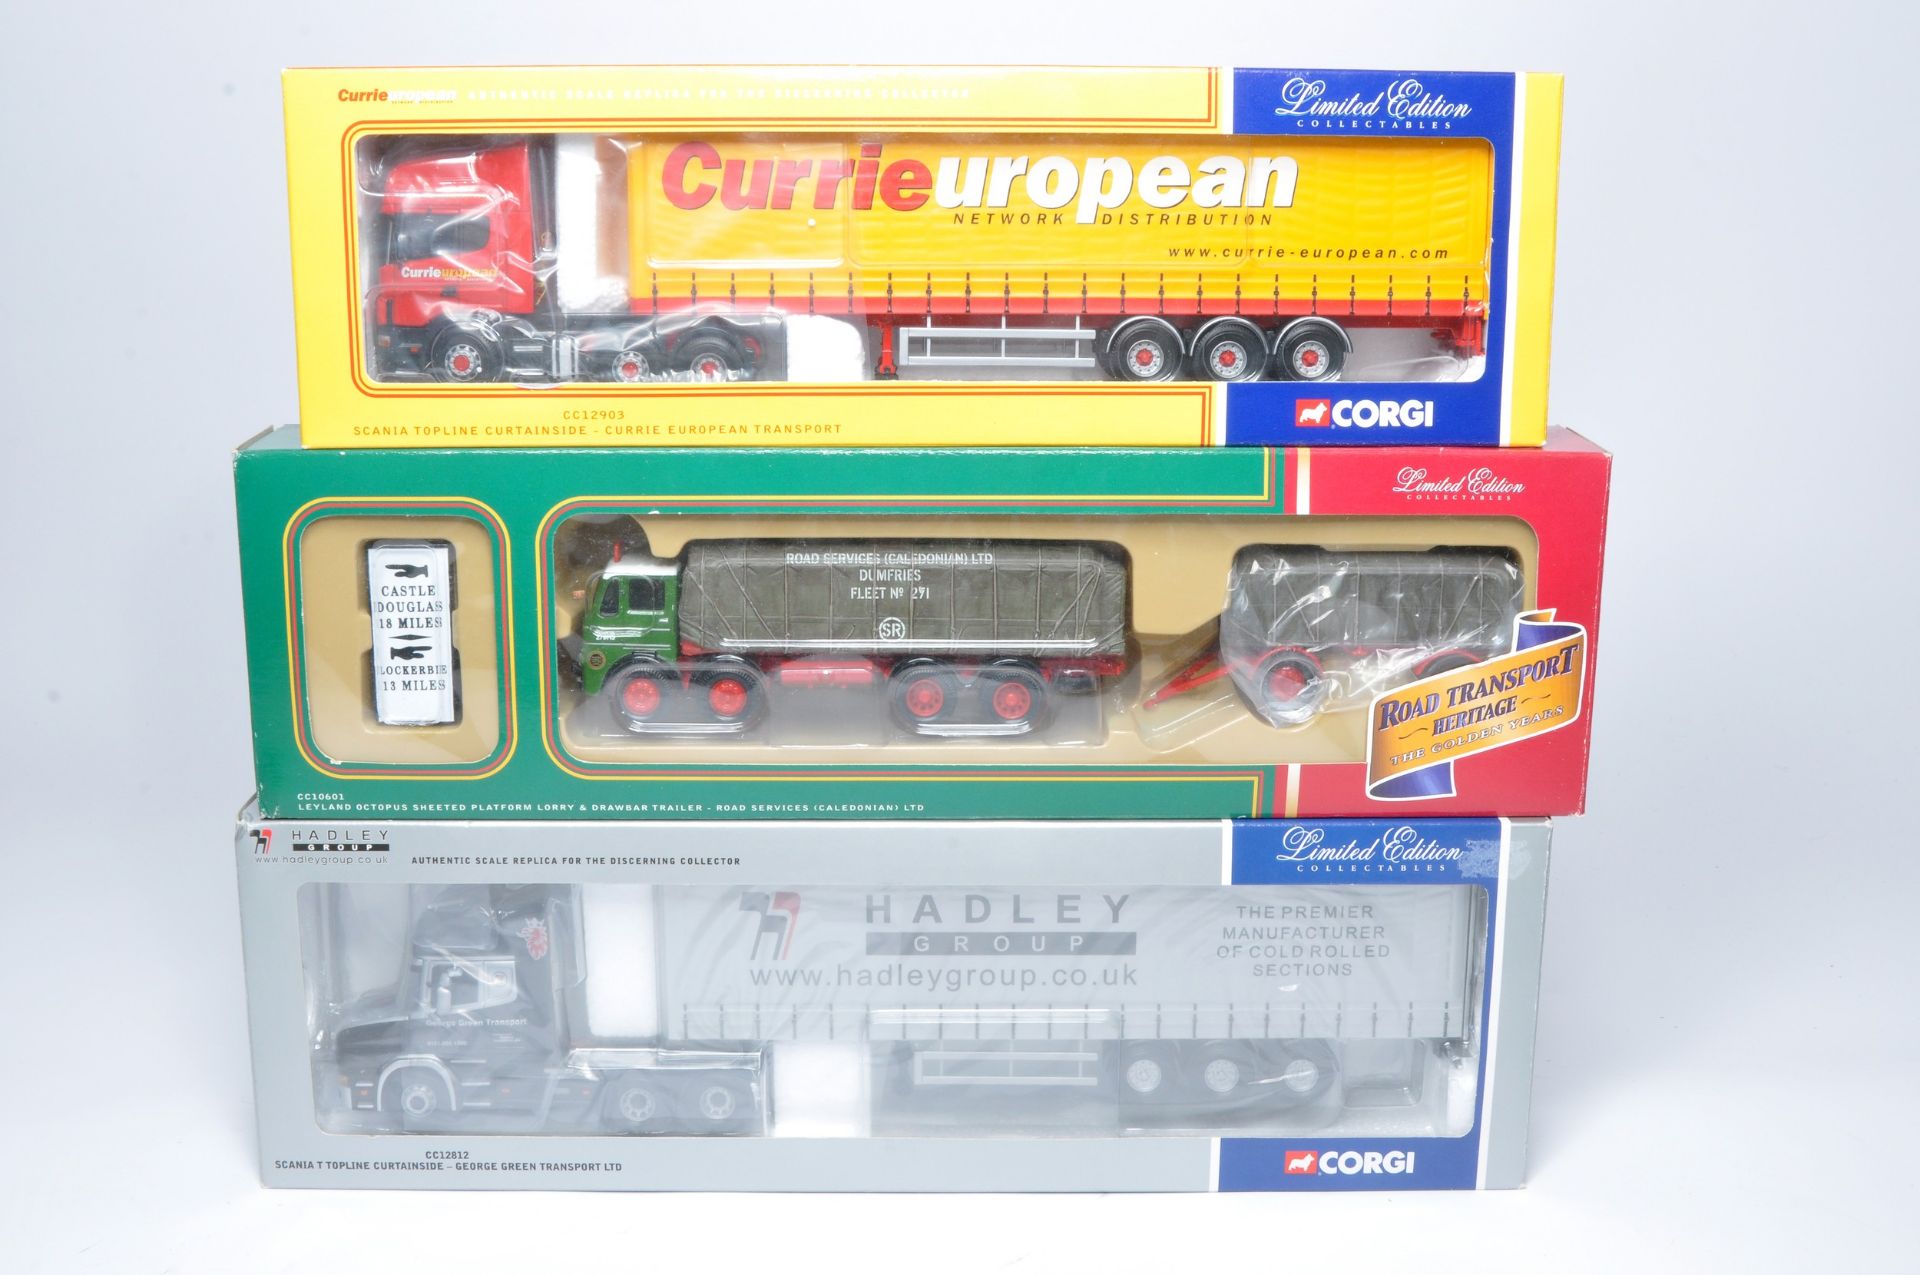 Corgi 1/50 diecast model truck issues x 3 comprising liveries of CRS, Currie and Hadley. As shown